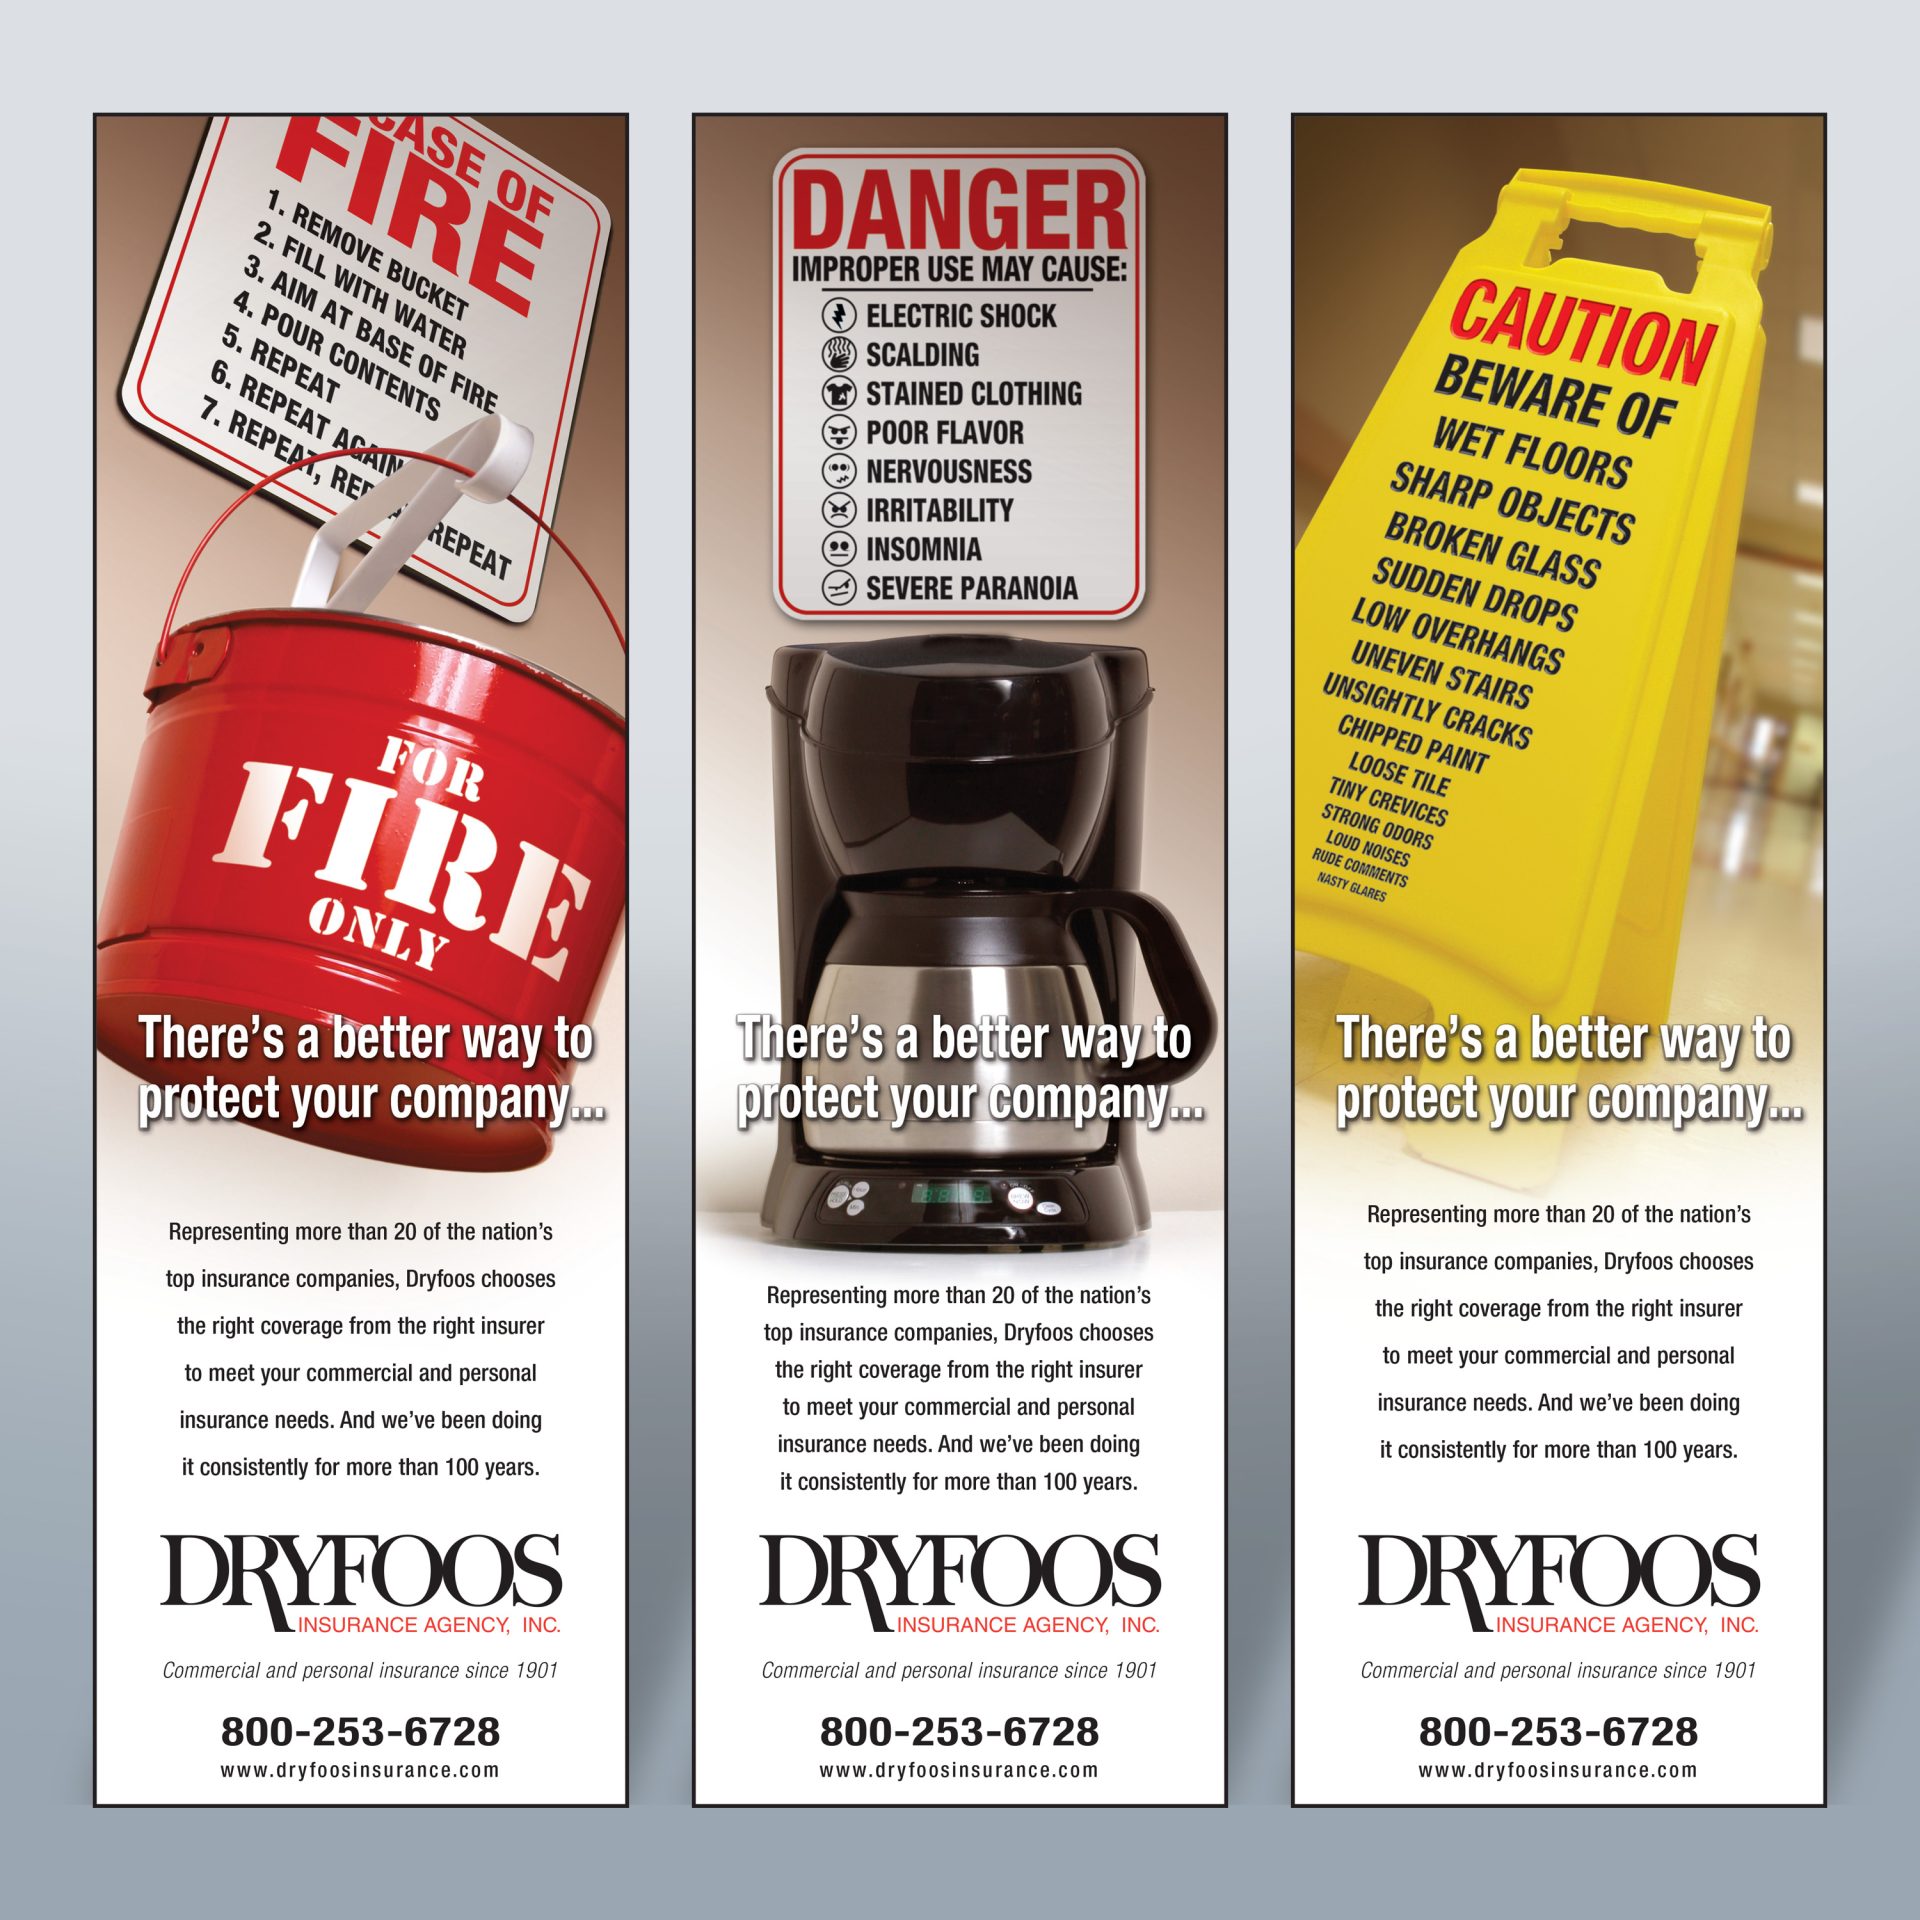 A series of three newspaper ads for Dryfoos Insurance Co.